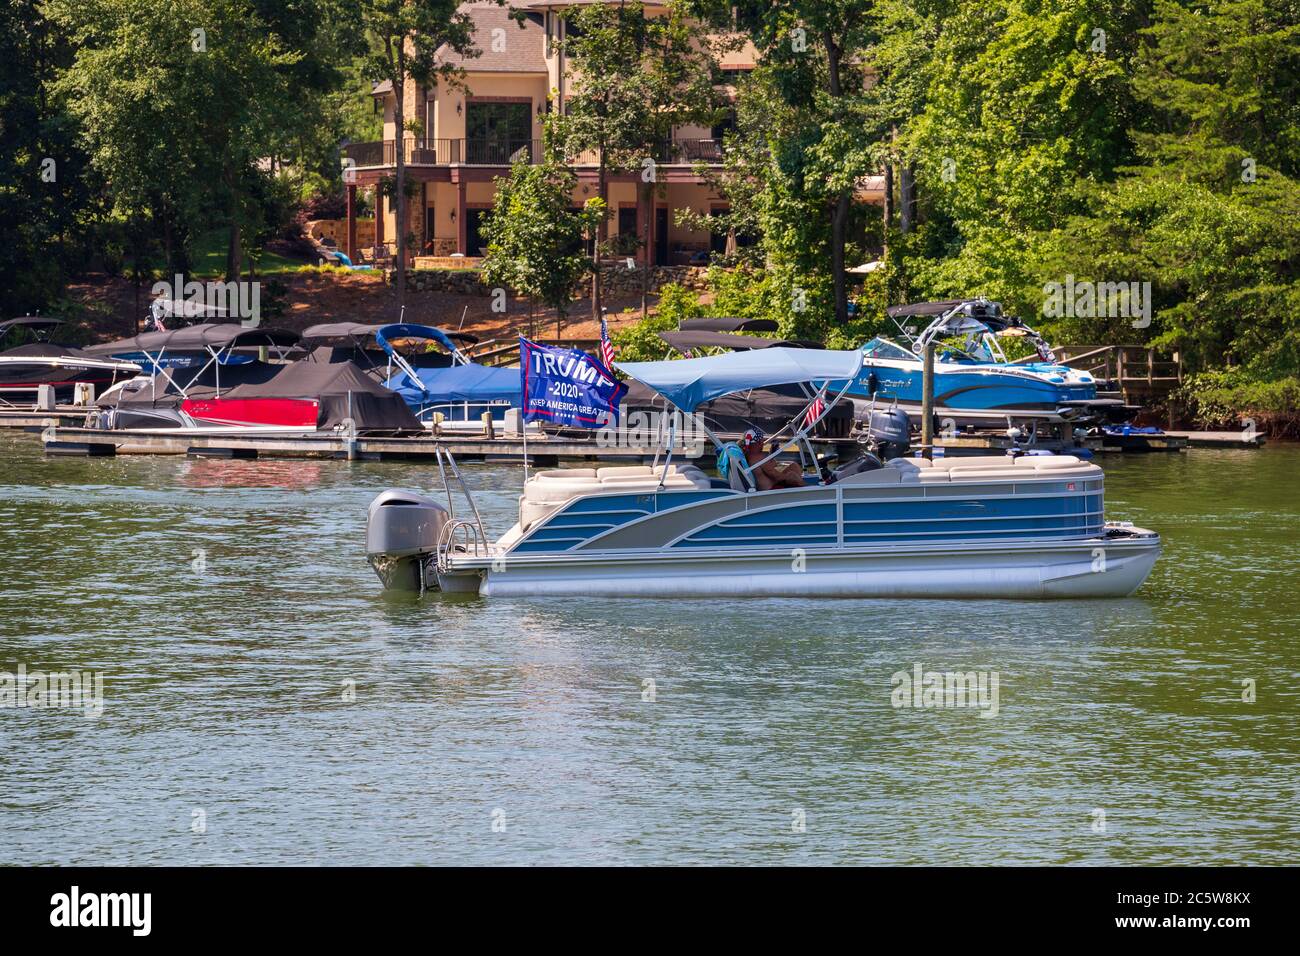 Mooresville, NC, USA - July 4, 2020: Boat flying Trump 2020 flag for President Donald Trump on Lake Norman near the Trump National Golf Club Charlotte Stock Photo